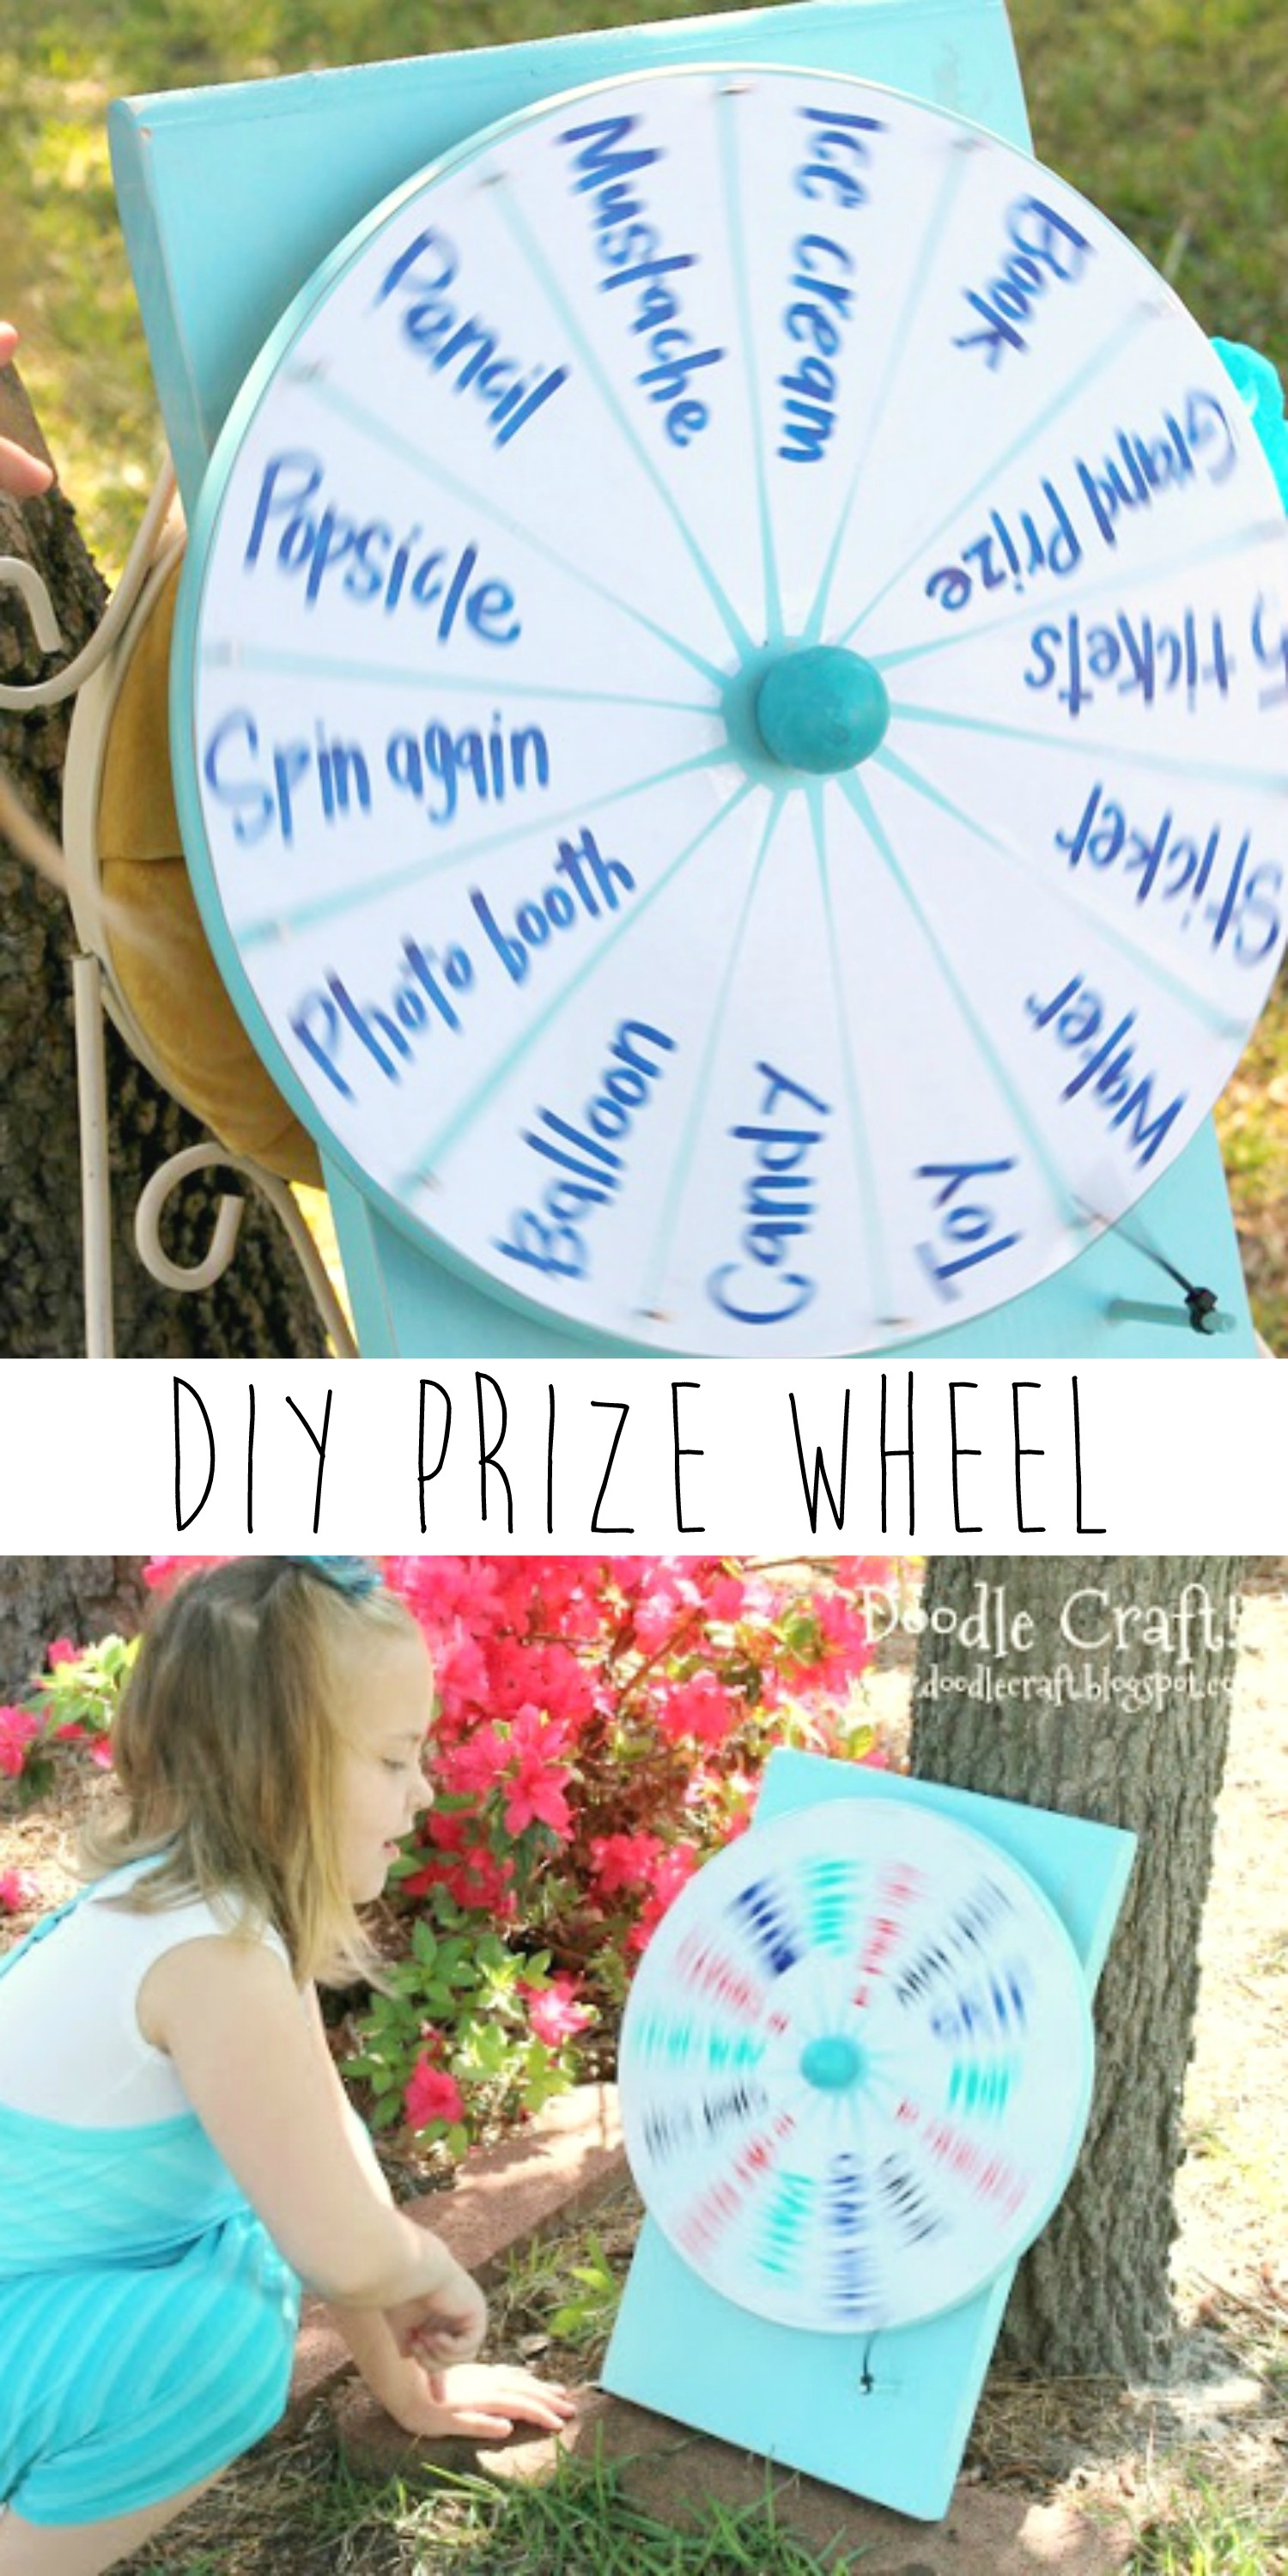 Prize Wheel Tutorial using 5 dollar lazy susan from IKEA! by doodle craft